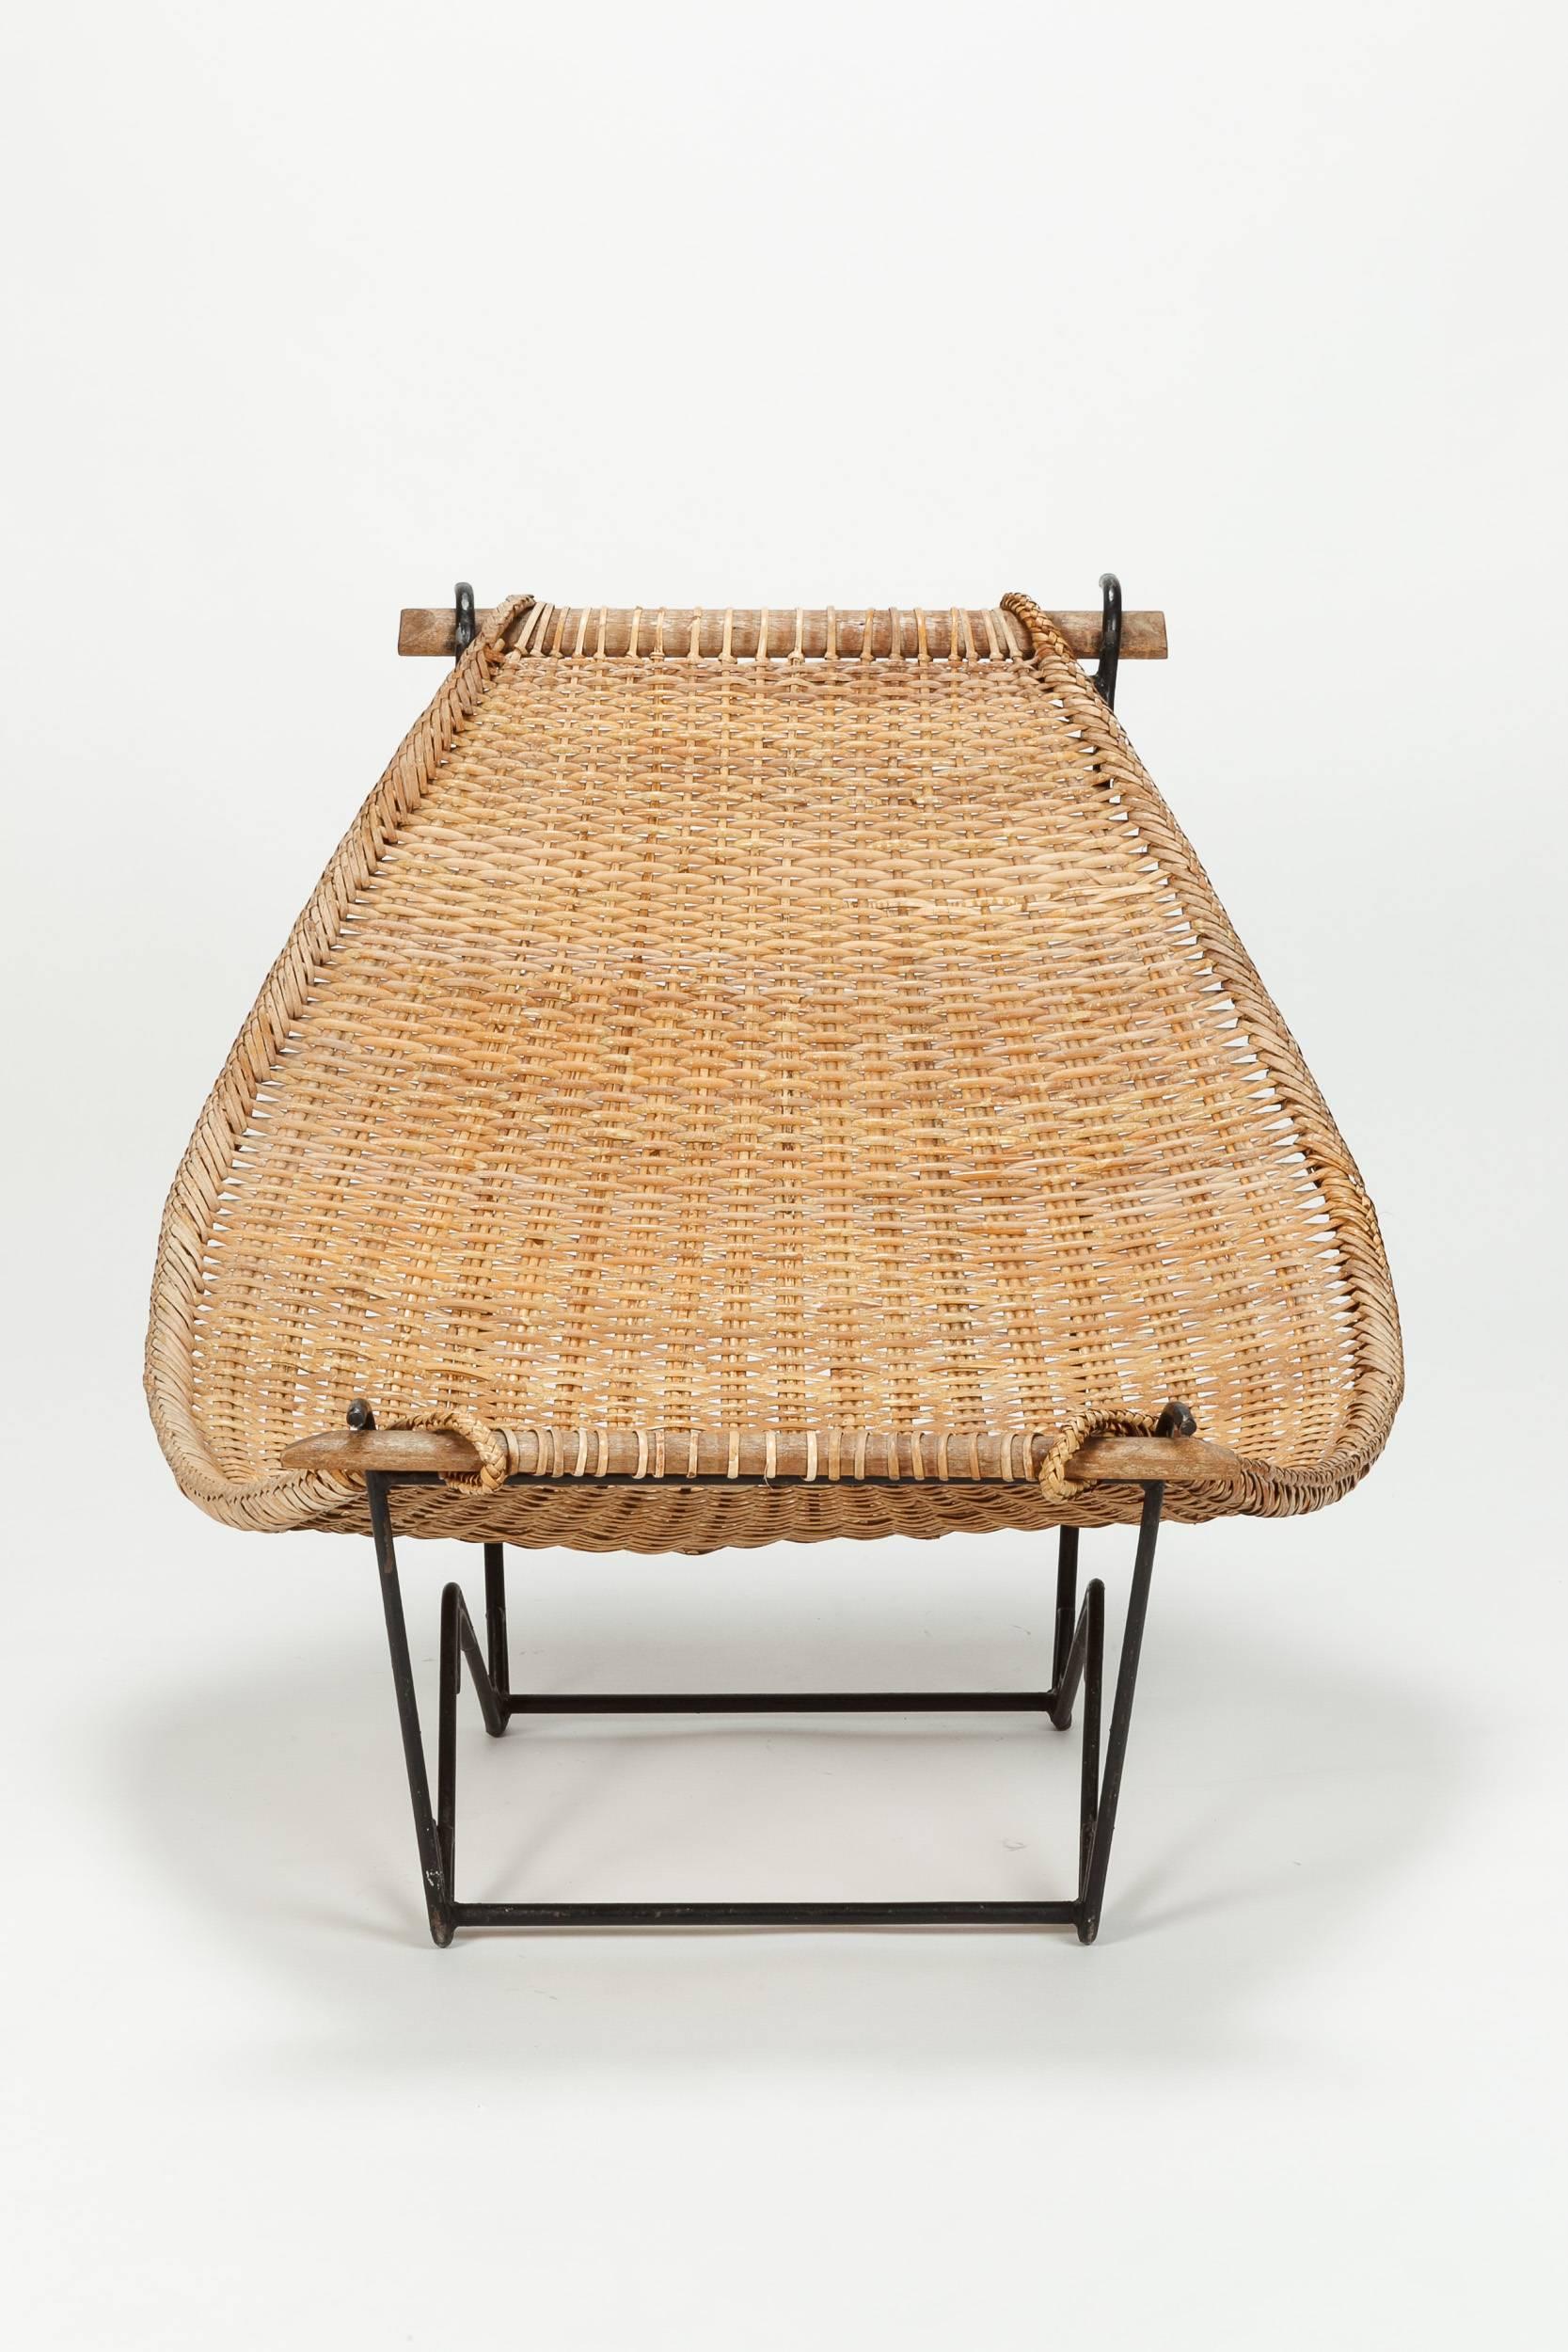 John Risley lounge chair 'Duyan' manufactured in the US in the 1950s. Made of rattan, base of metal.